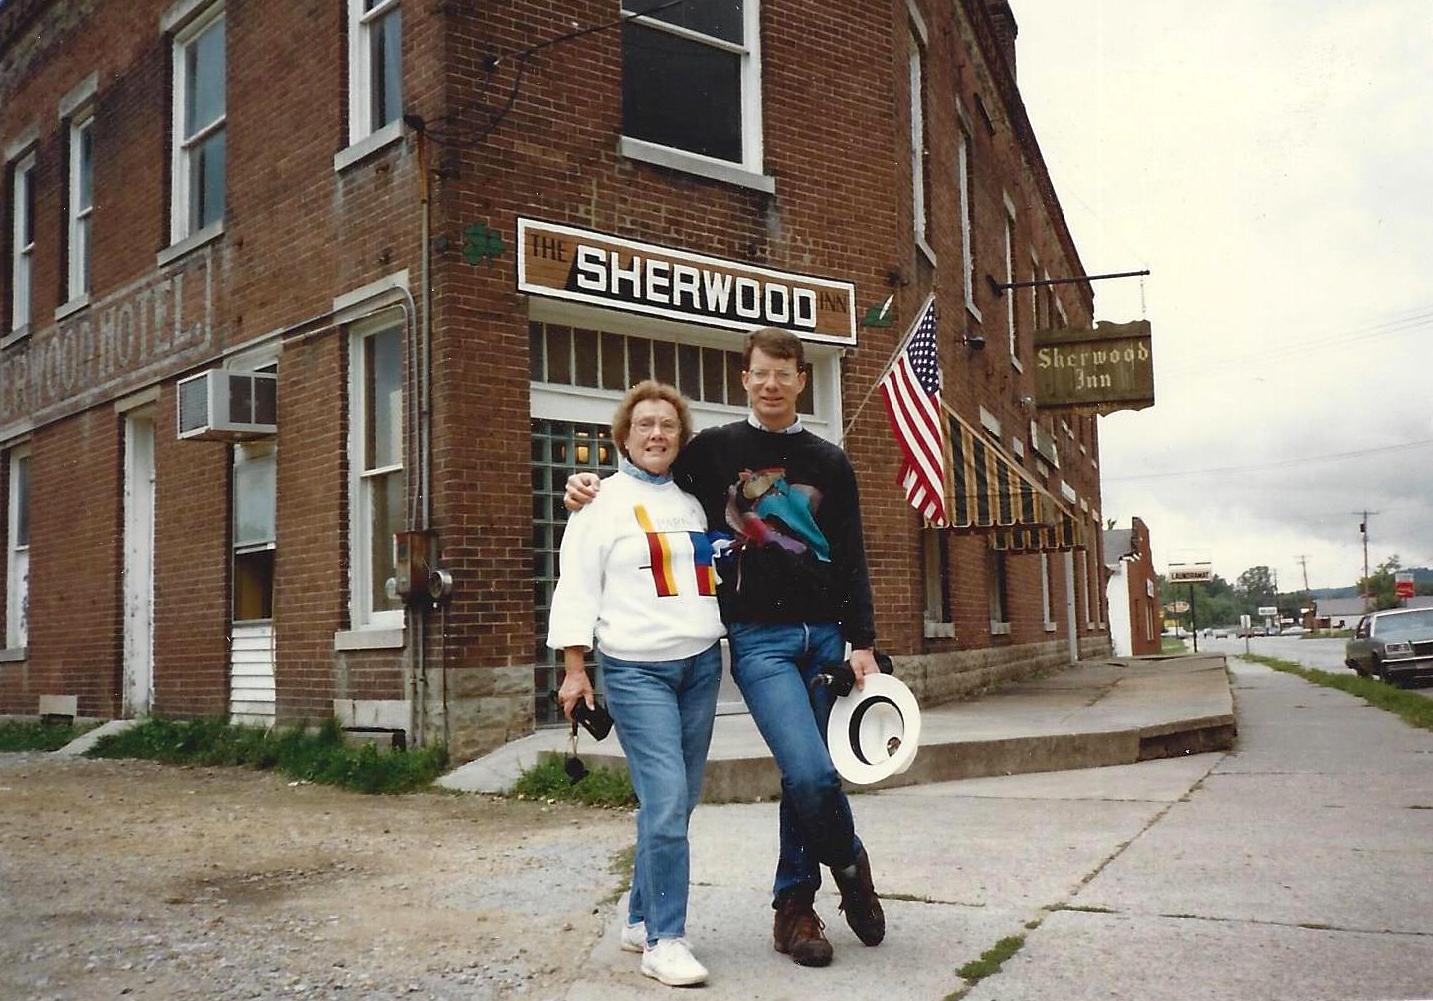 Fenton and his mother, Nancy Johnson Head, in front of the Sherwood Inn, 1988. Fenton shares, 